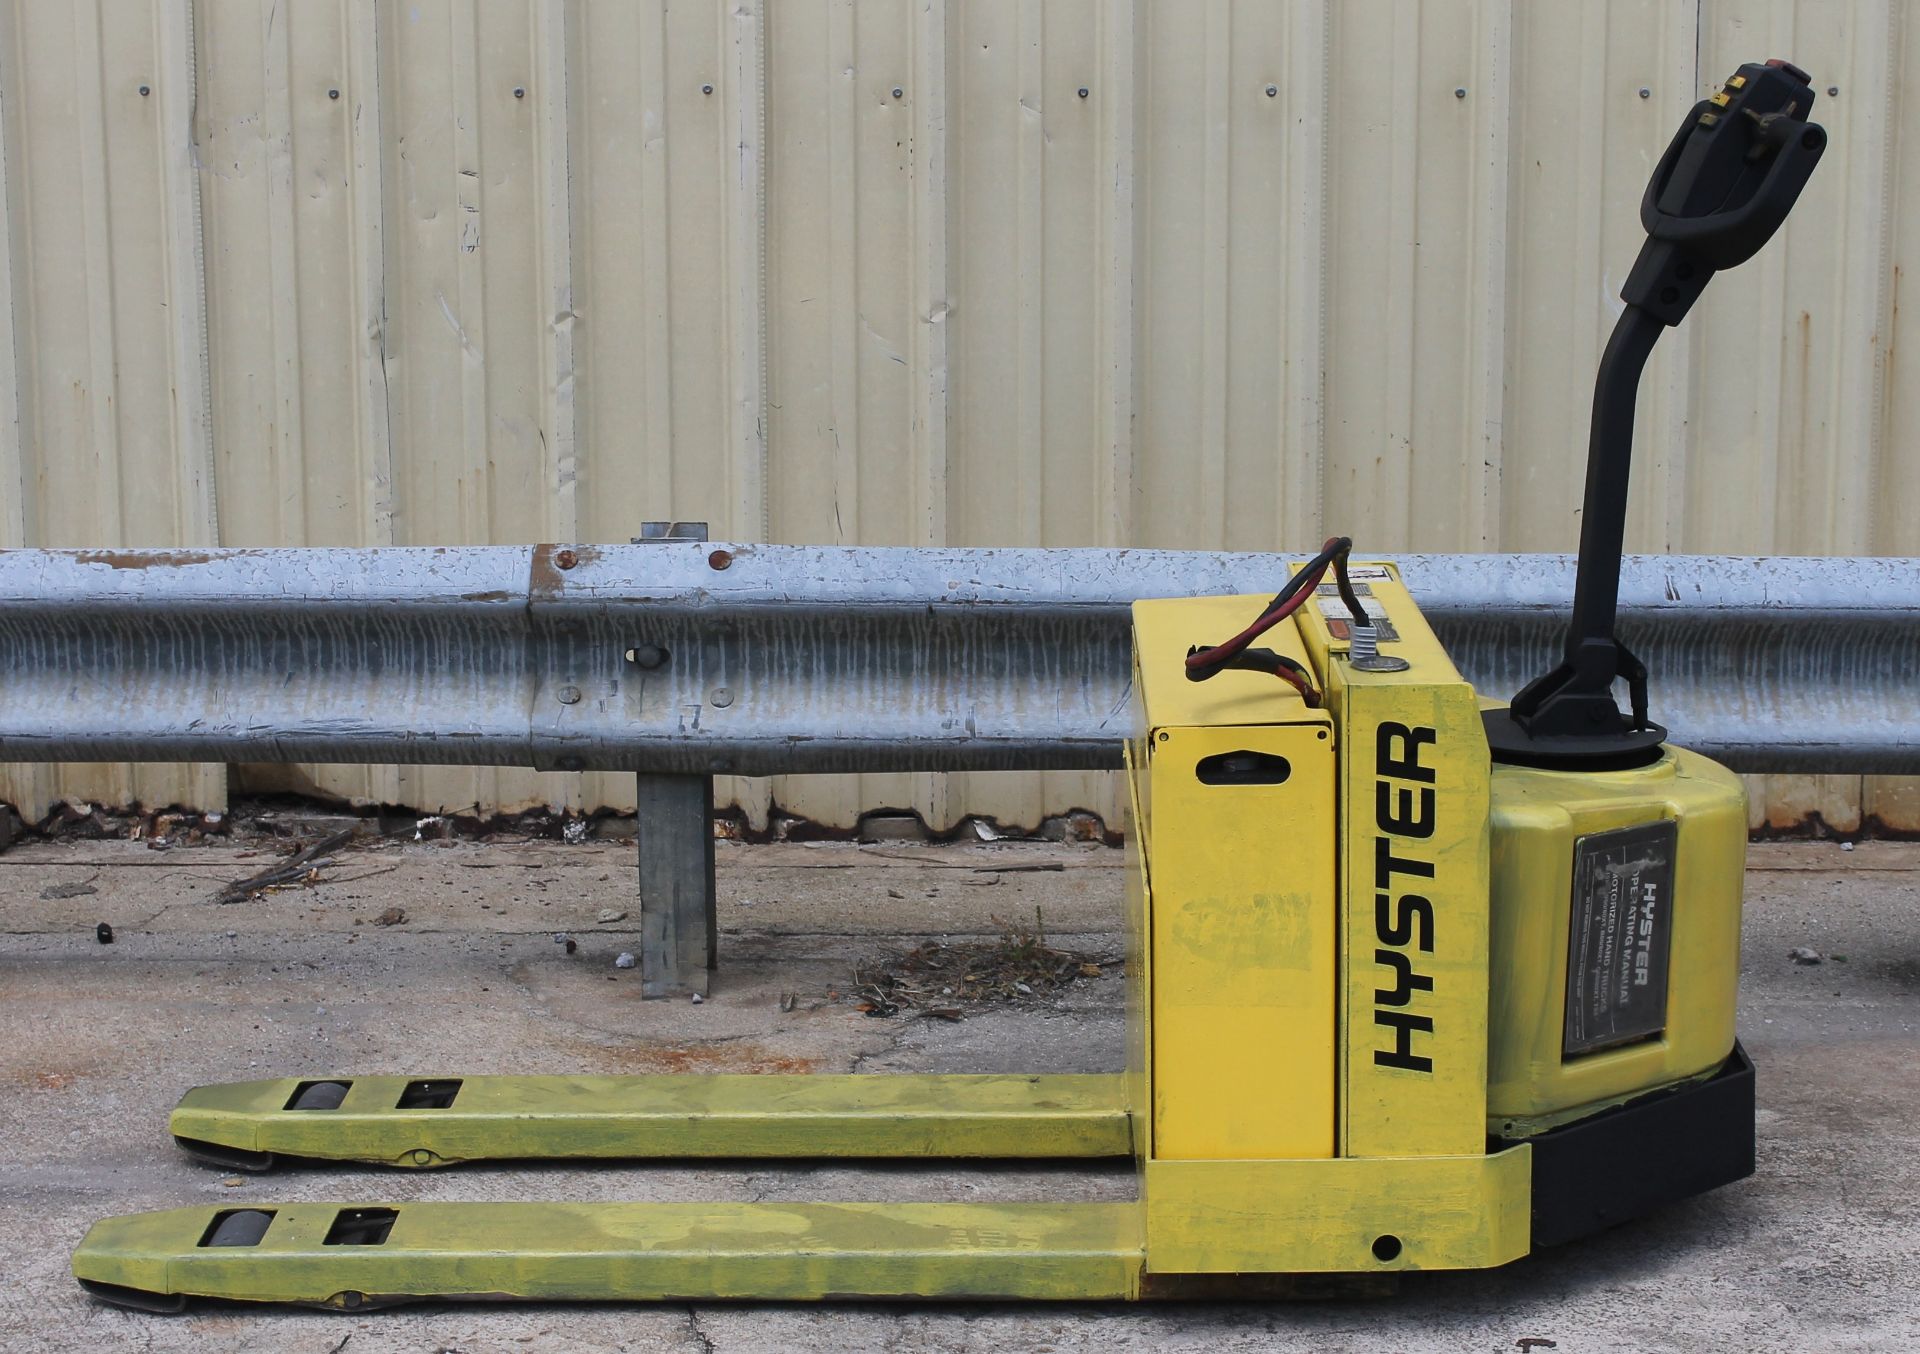 HYSTER 4500 LBS CAPACITY ELECTRIC PALLET JACK (WATCH VIDEO) - Image 2 of 5